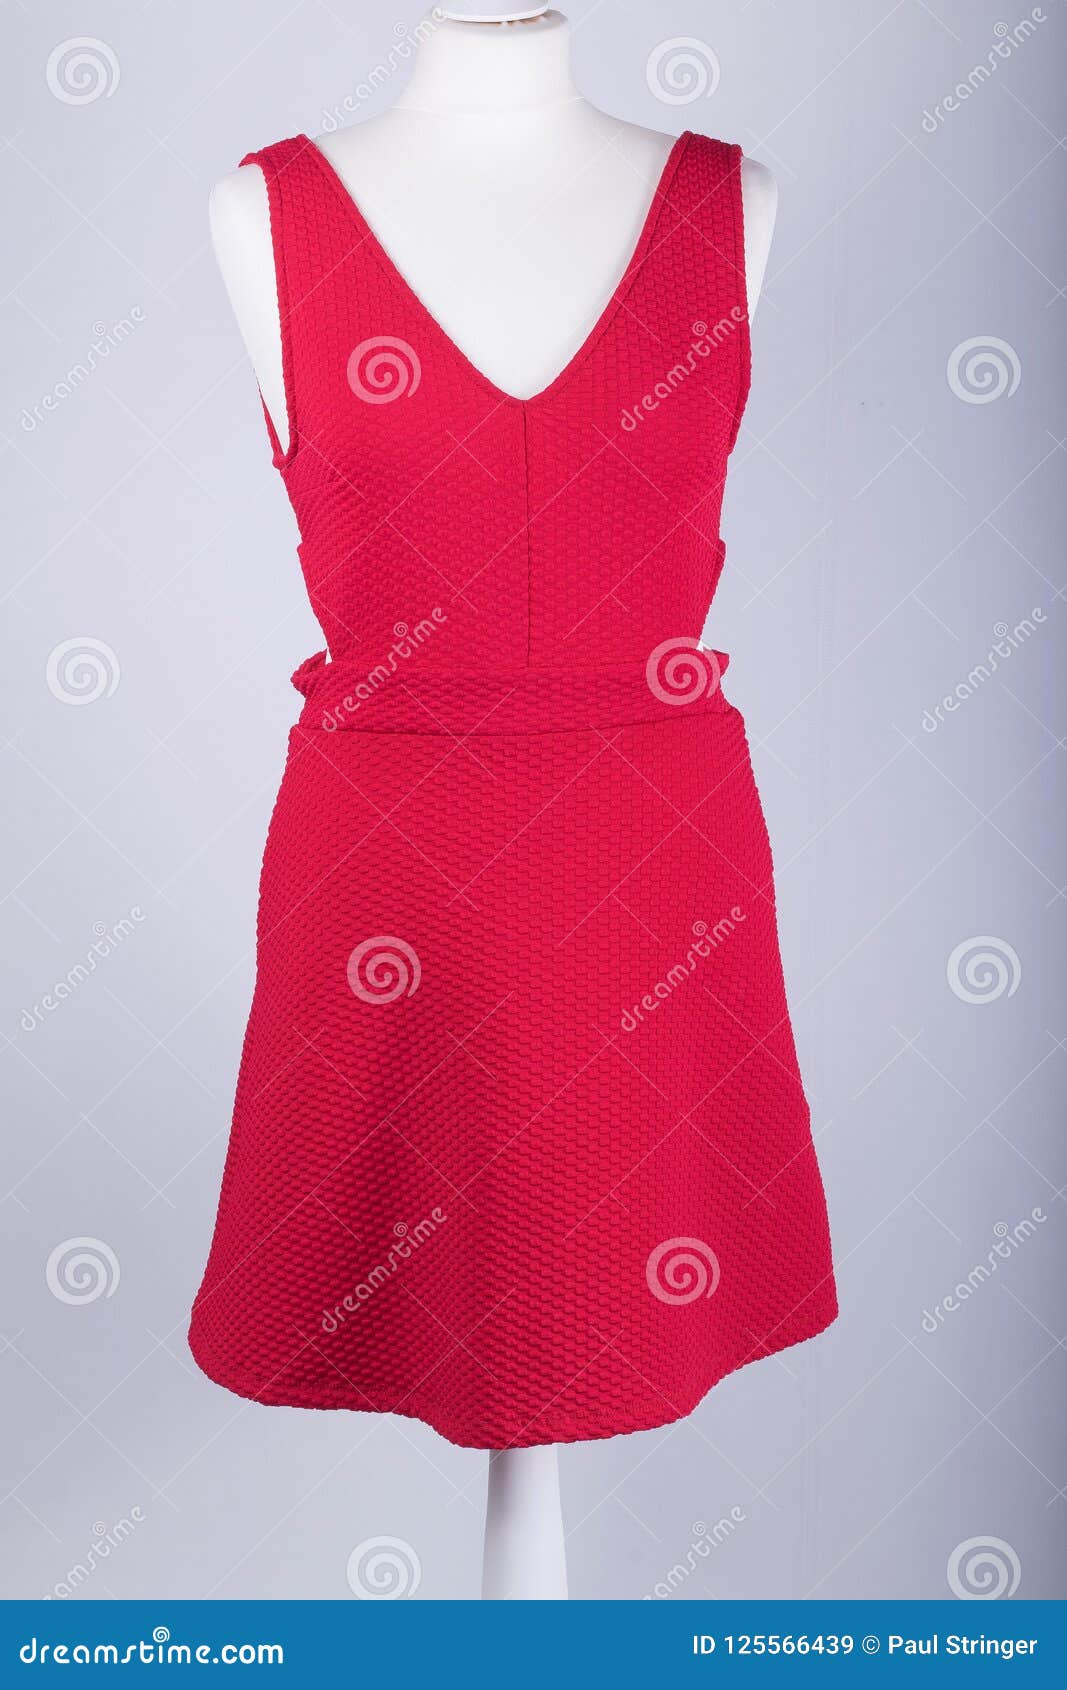 Tailors Mannequin Dressed in a Red Dress Stock Image - Image of uniform ...